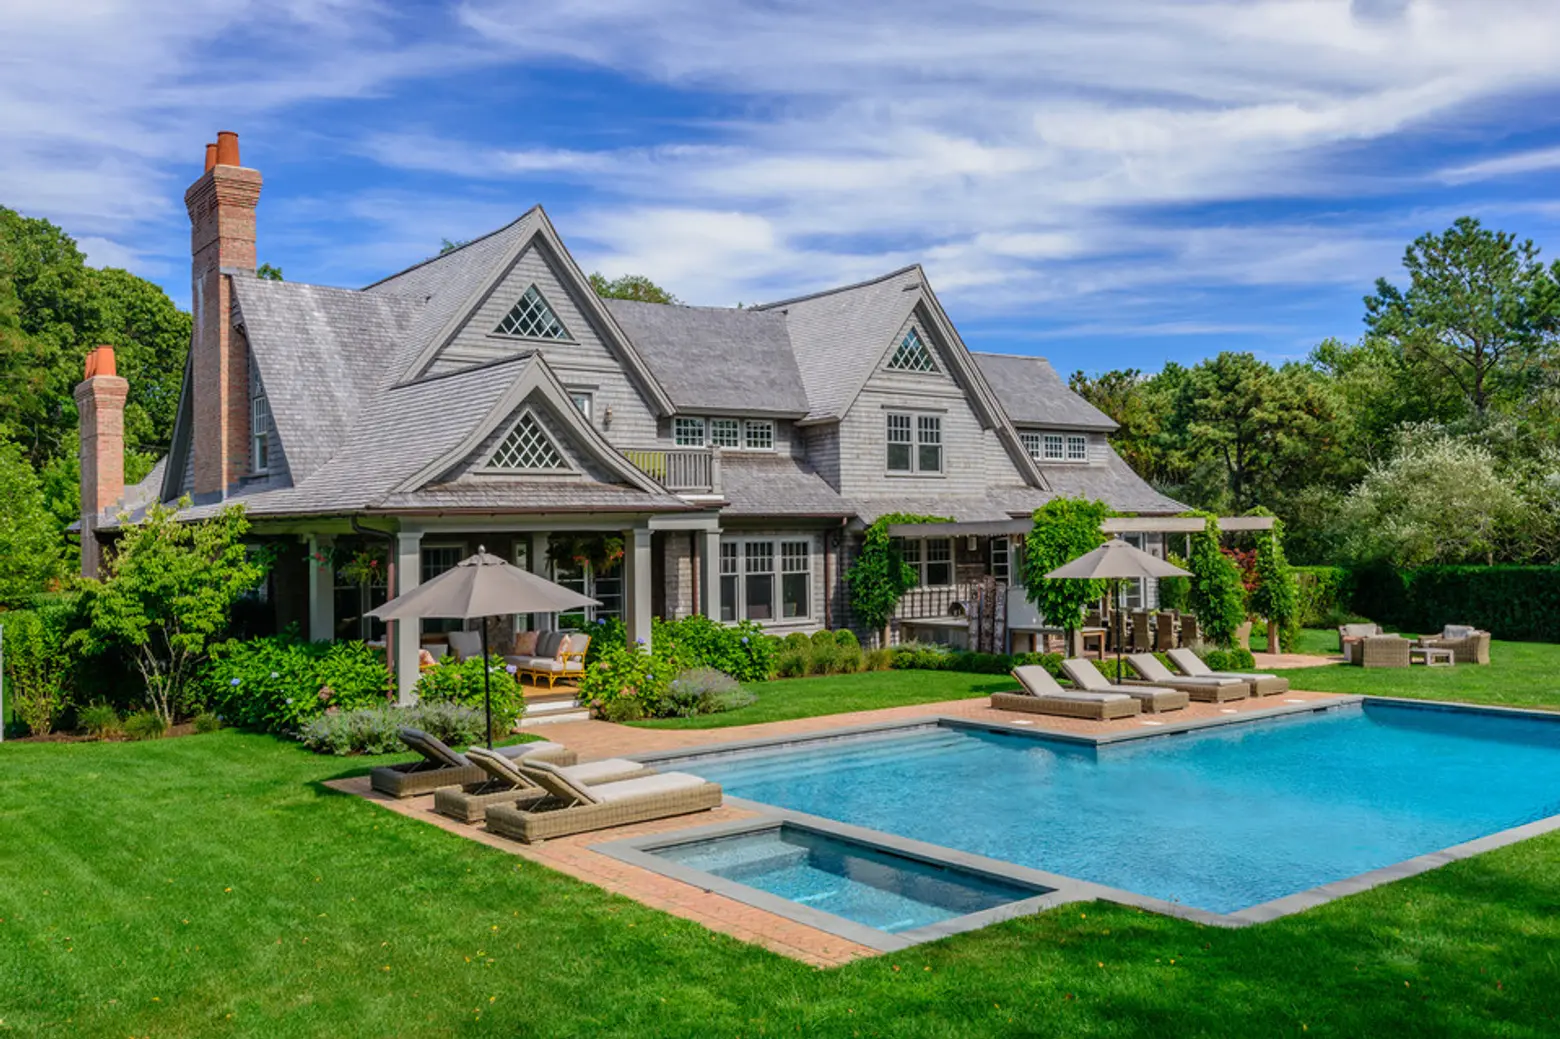 Katie Lee, Food Network Star and Billy Joel’s Ex, Lists Hamptons Estate for $6.5M